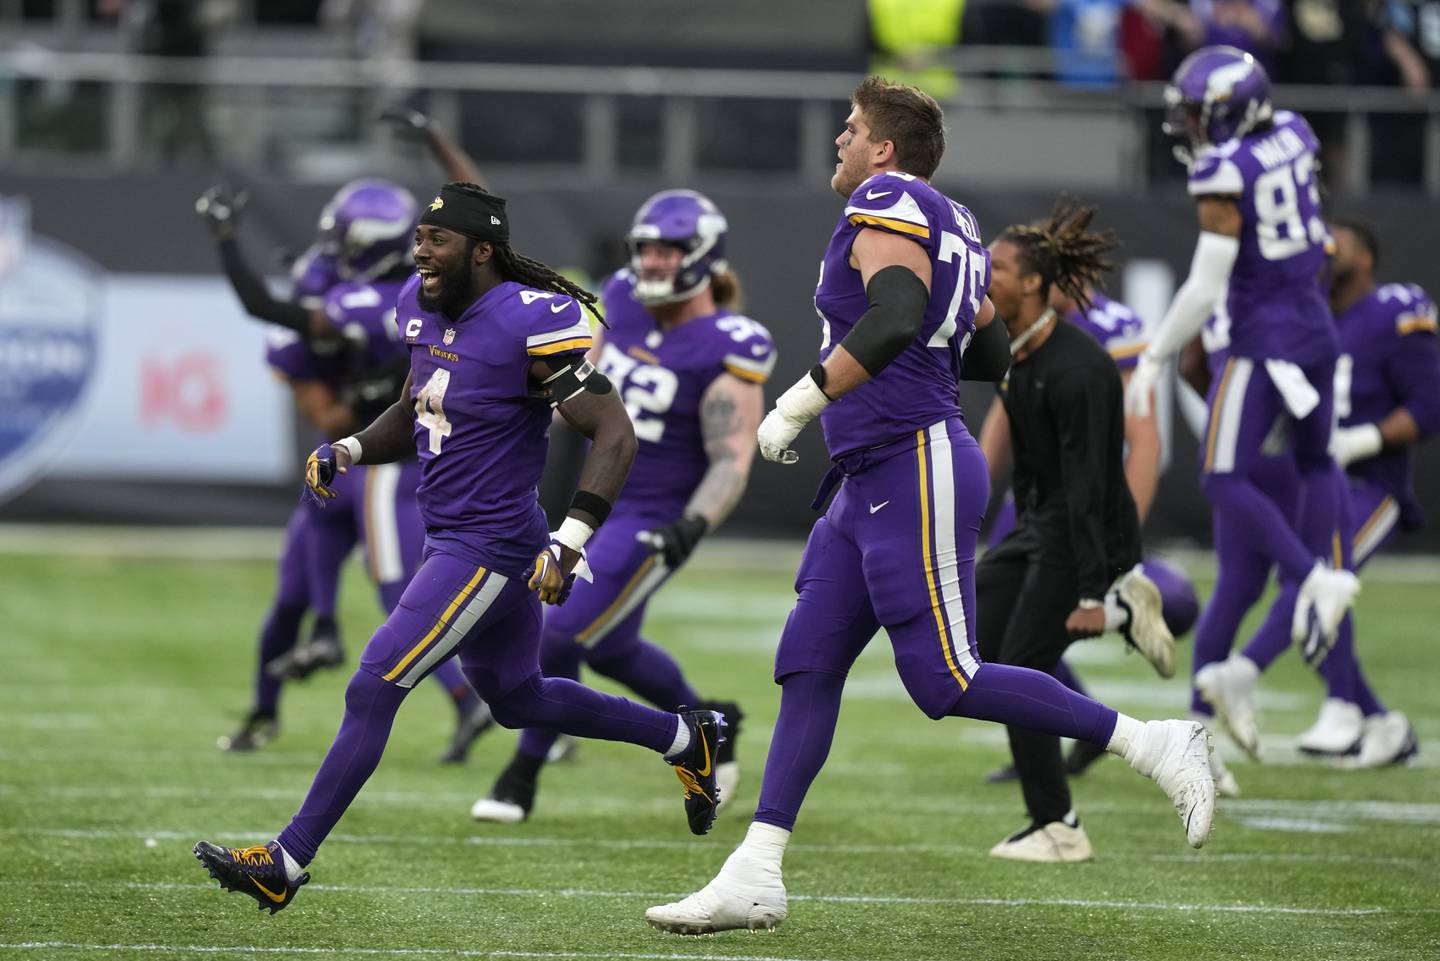 Vikings players celebrate after beating the Saints on Sunday, Oct. 2, 2022, at Tottenham Hotspur Stadium in London.